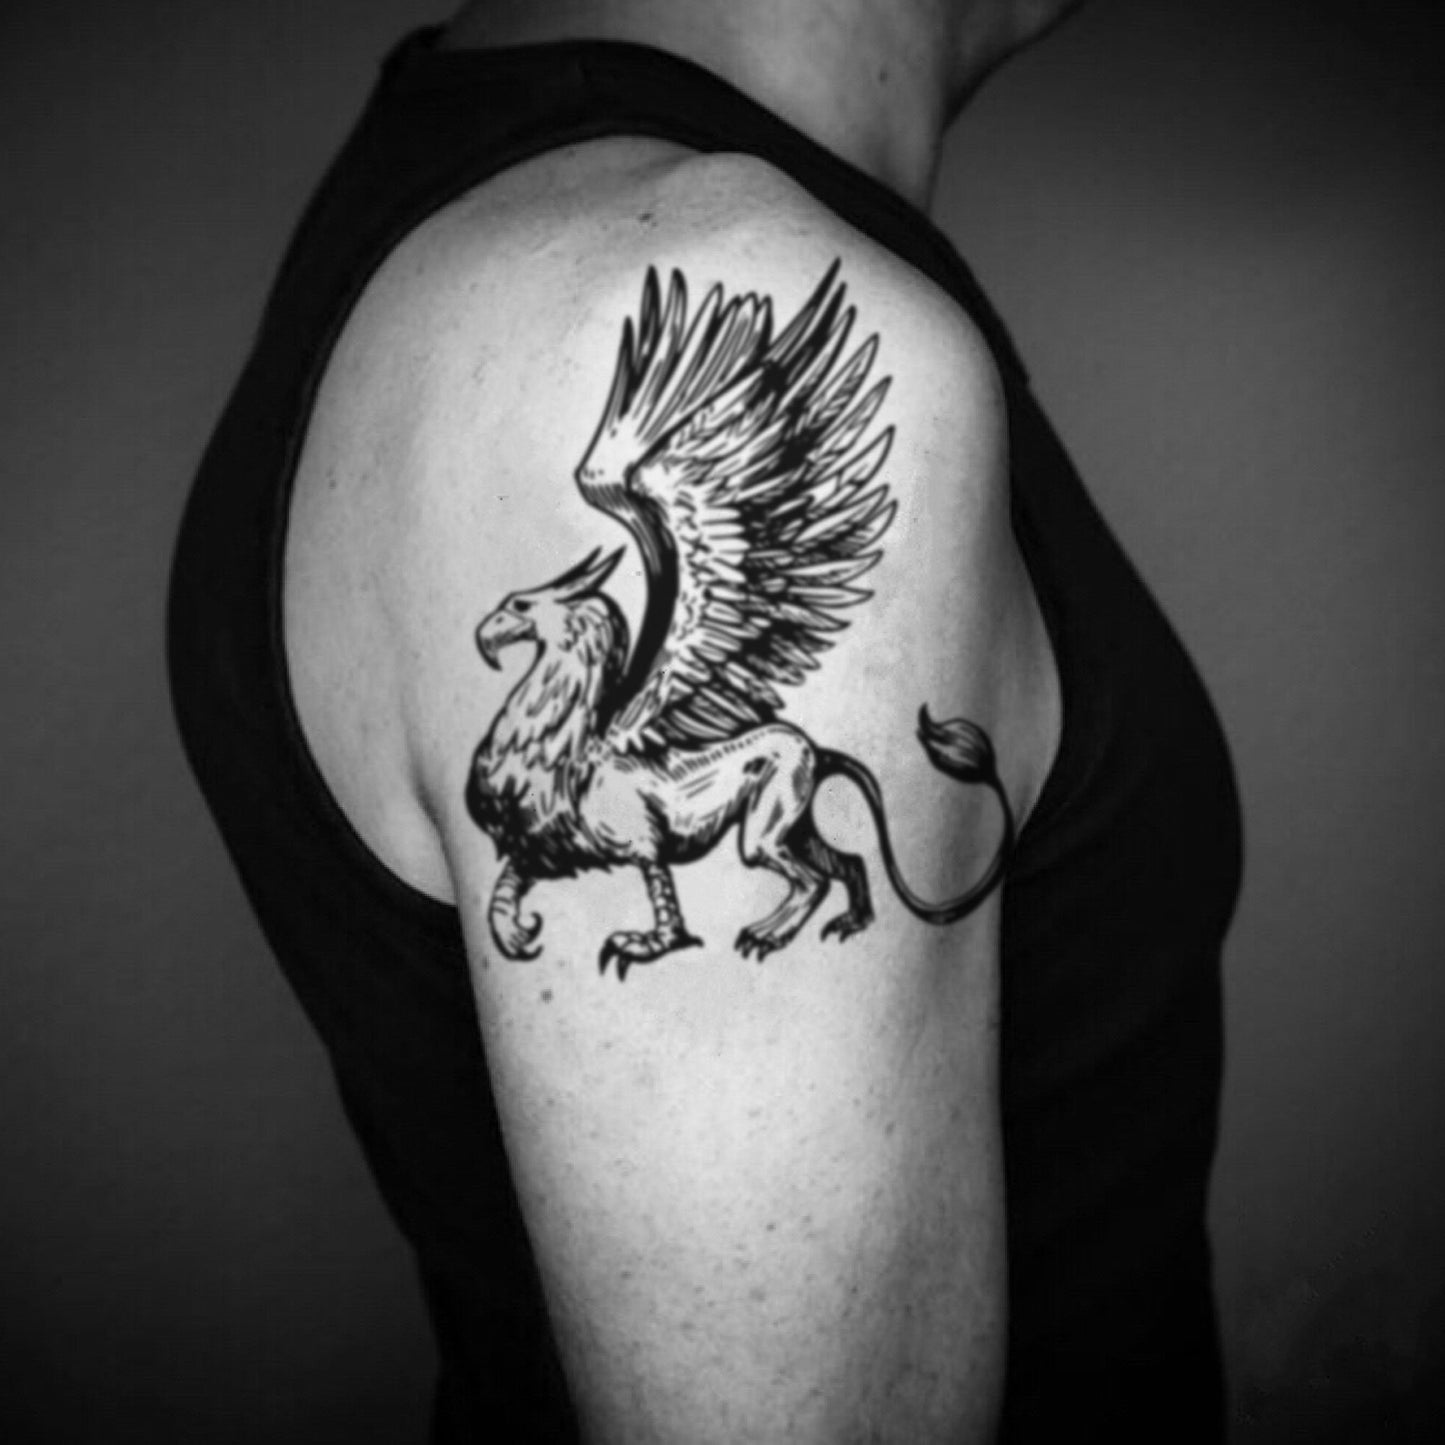 fake big griffin gryphon mythical creature animal temporary tattoo sticker design idea on upper arm